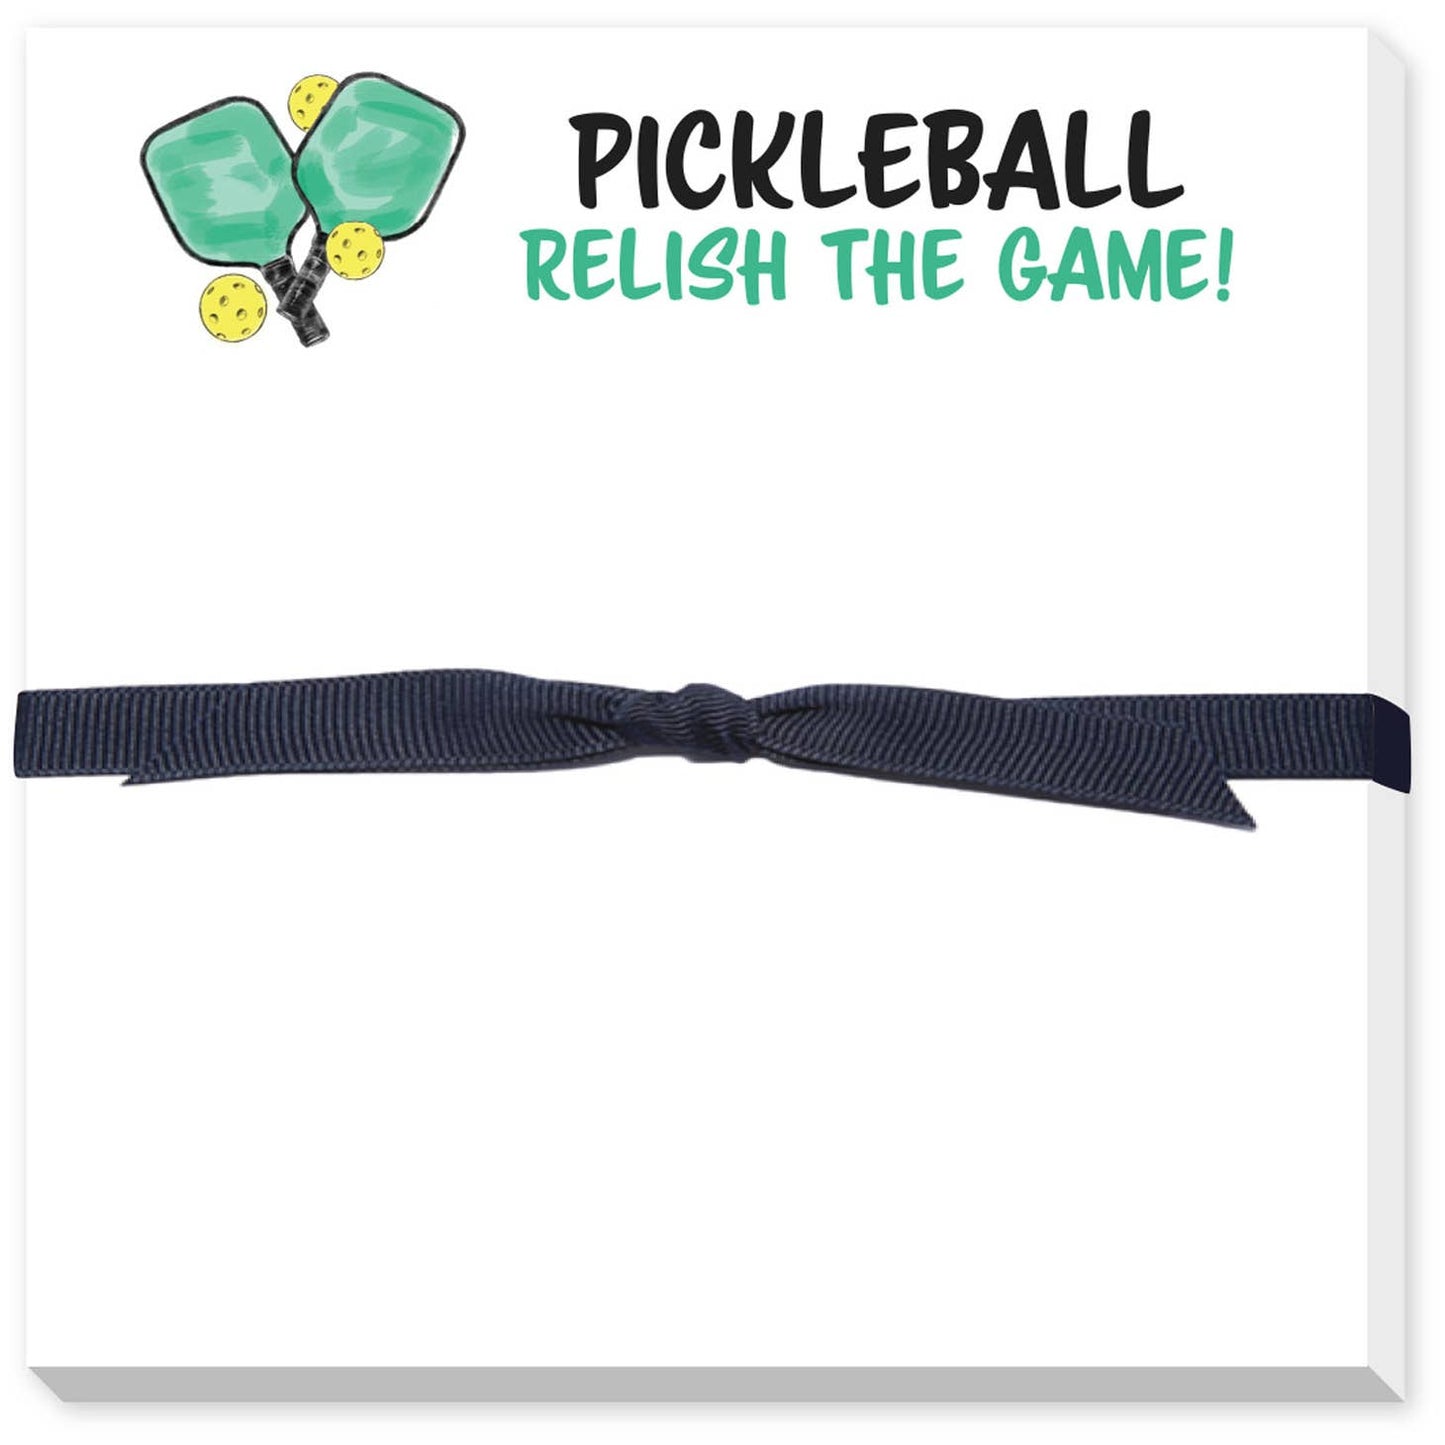 Pickleball Relish The Game! Note Pad